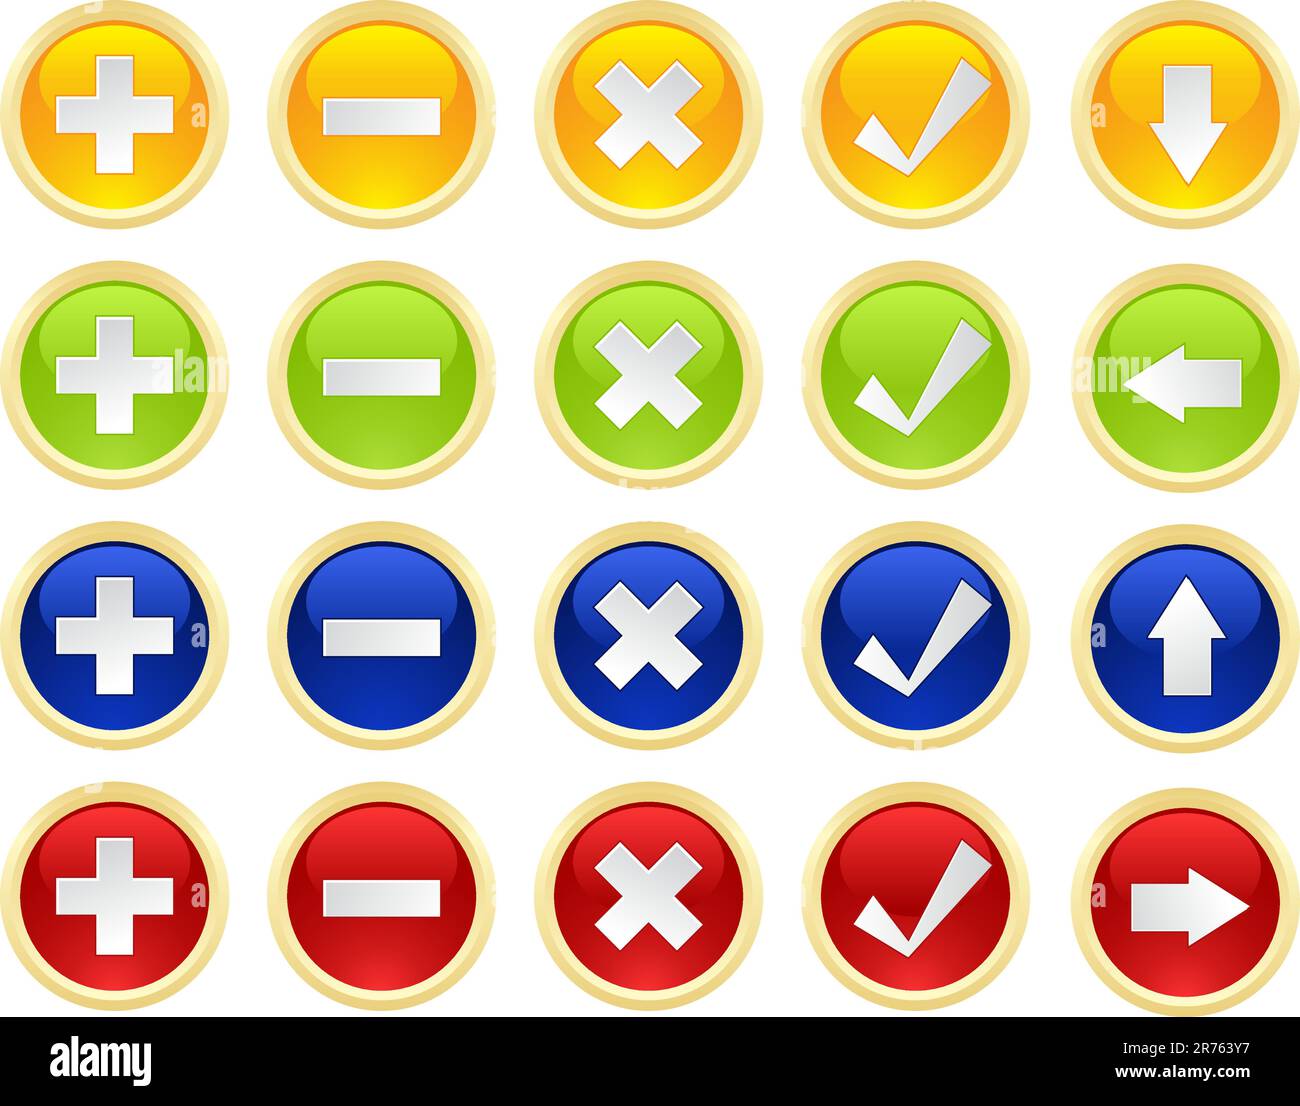 Set buttons: add, exclude, check, delete, accept, arrows. Stock Vector